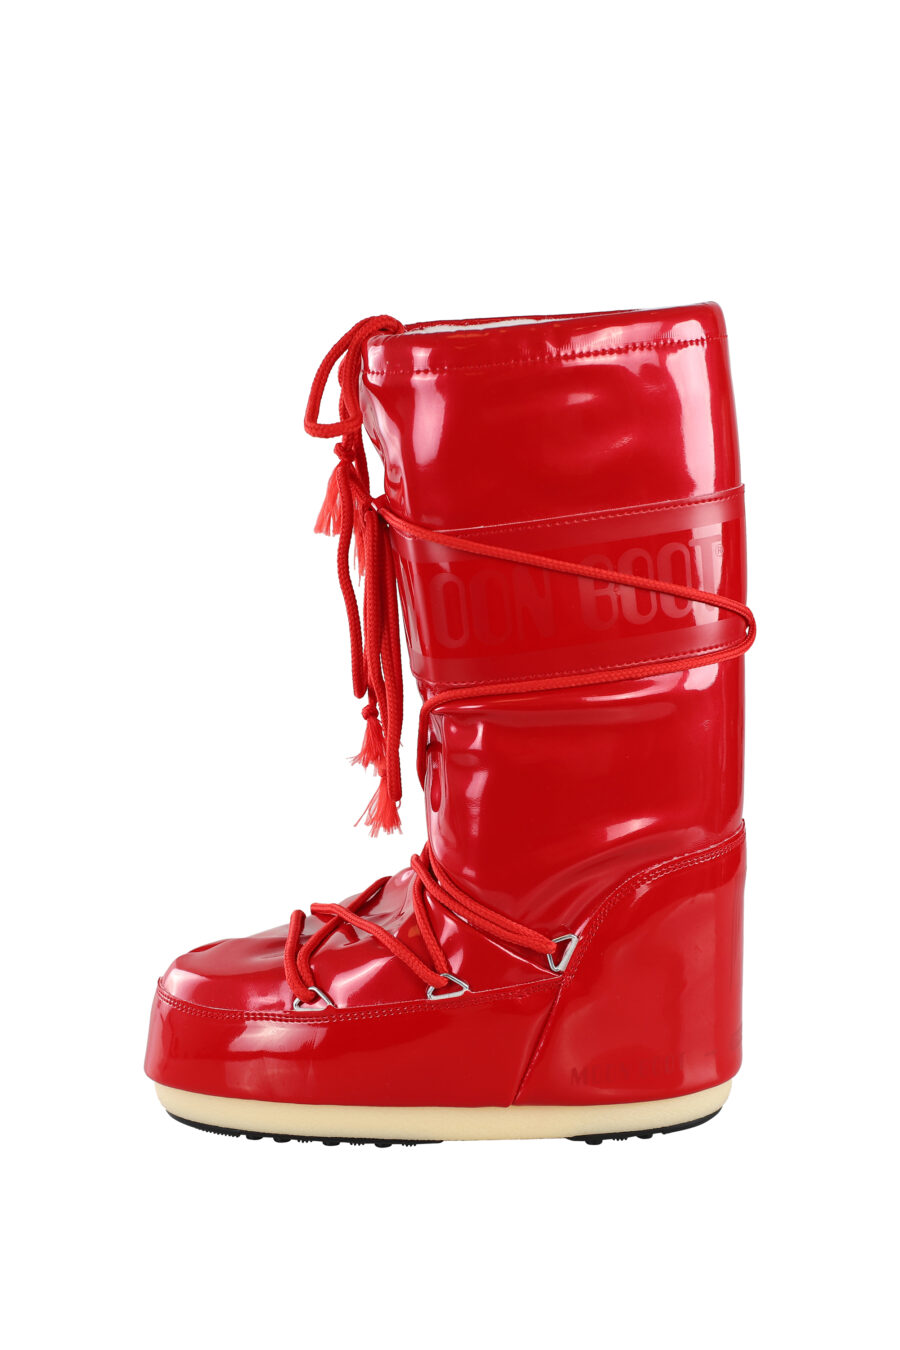 Red snow boots with monochrome logo - IMG 6751